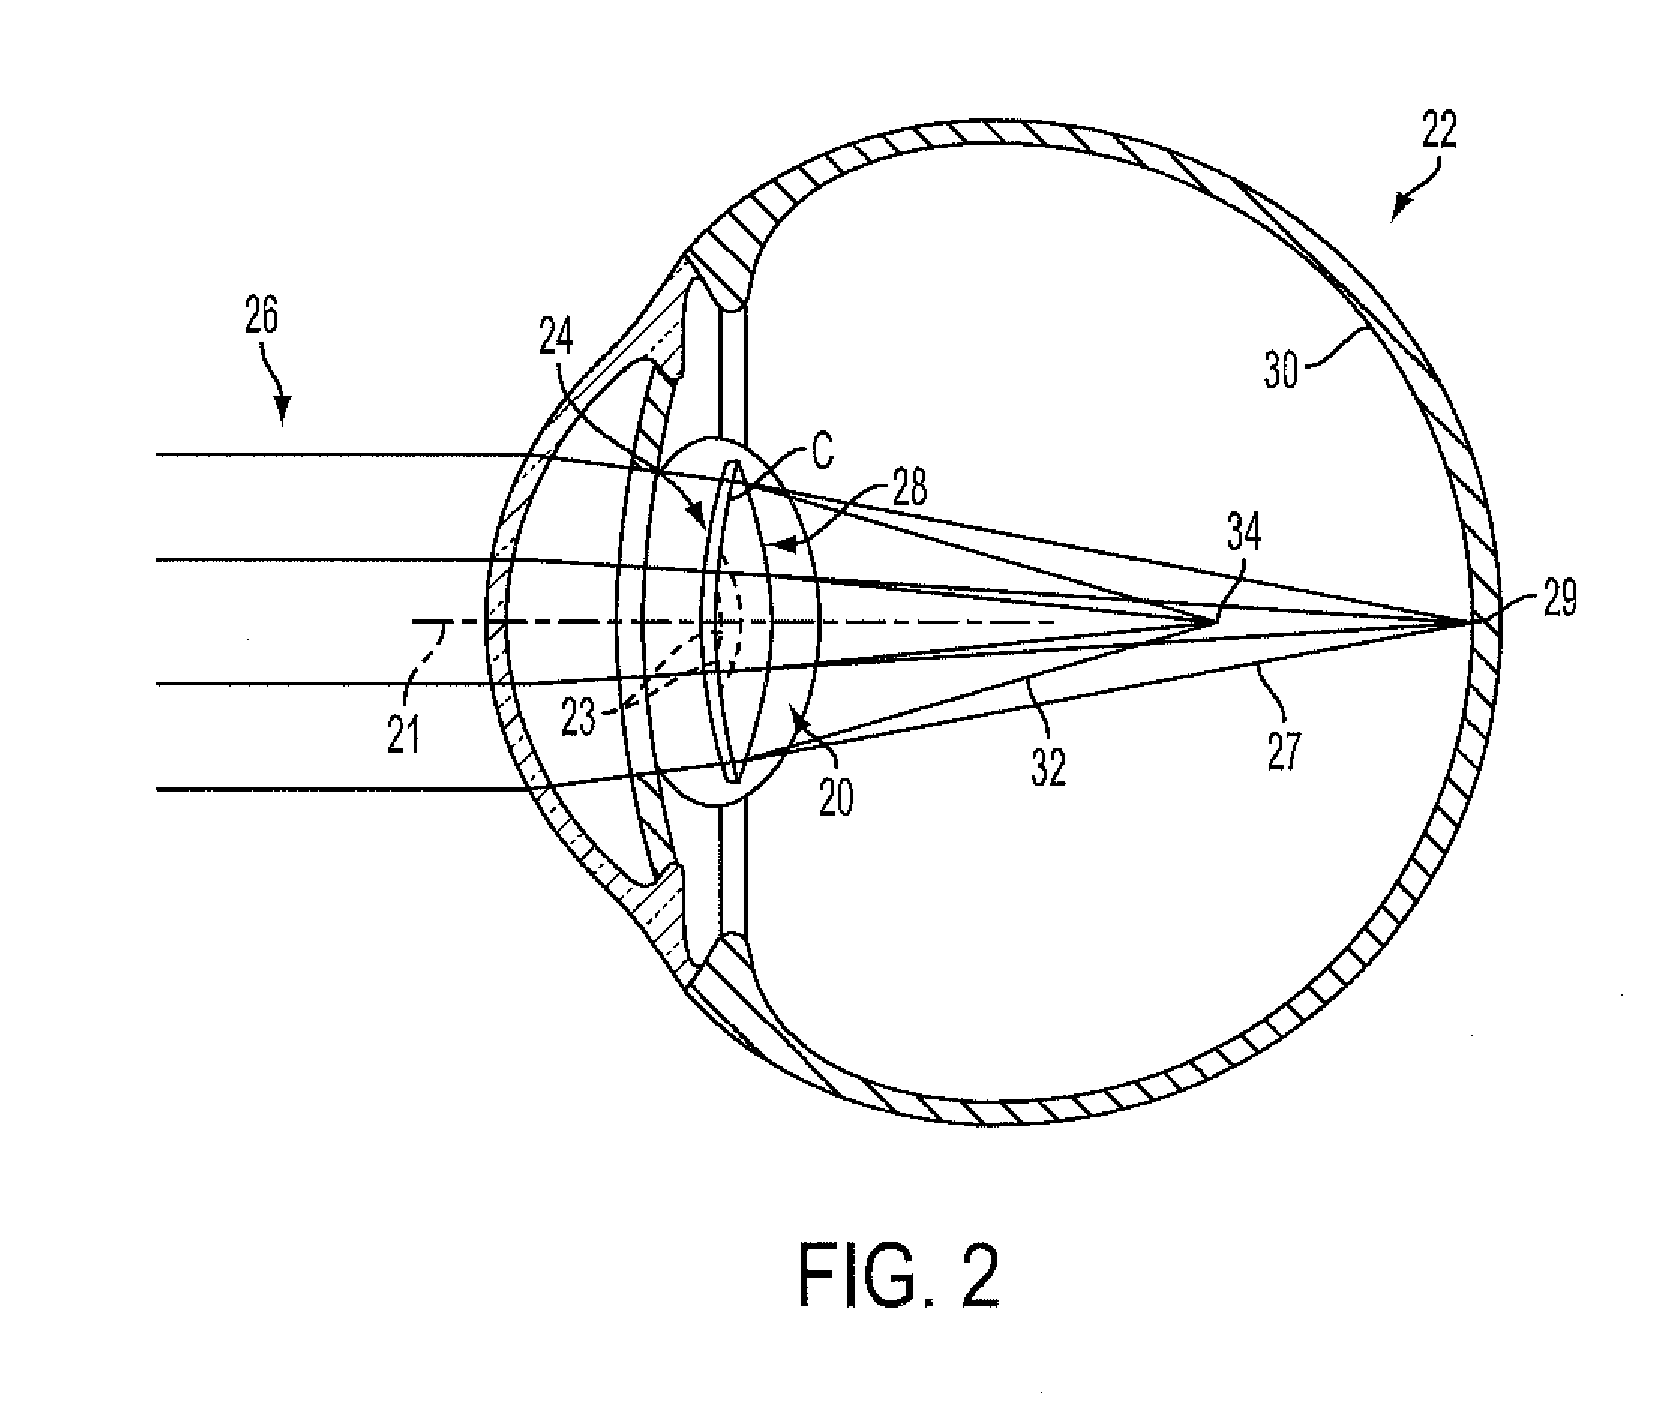 Multifocal lens having an optical add power progression, and a system and method of providing same